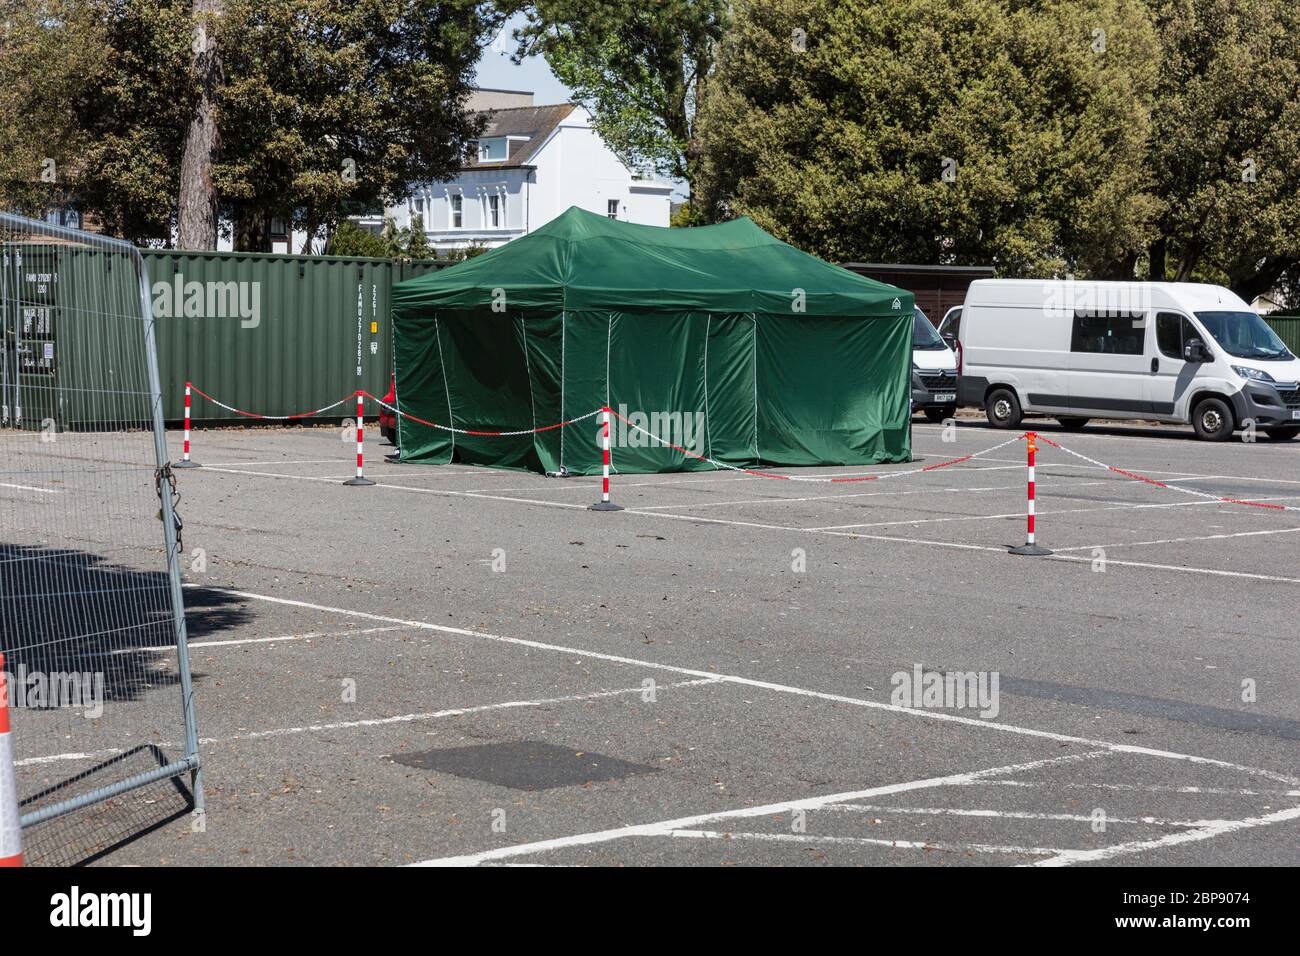 Eastbourne, England. 18 May 2020. Army set up a mobile Covid testing centre in College Road car park, but it remains empty. Credit: Antony Meadley/Alamy Live News Stock Photo